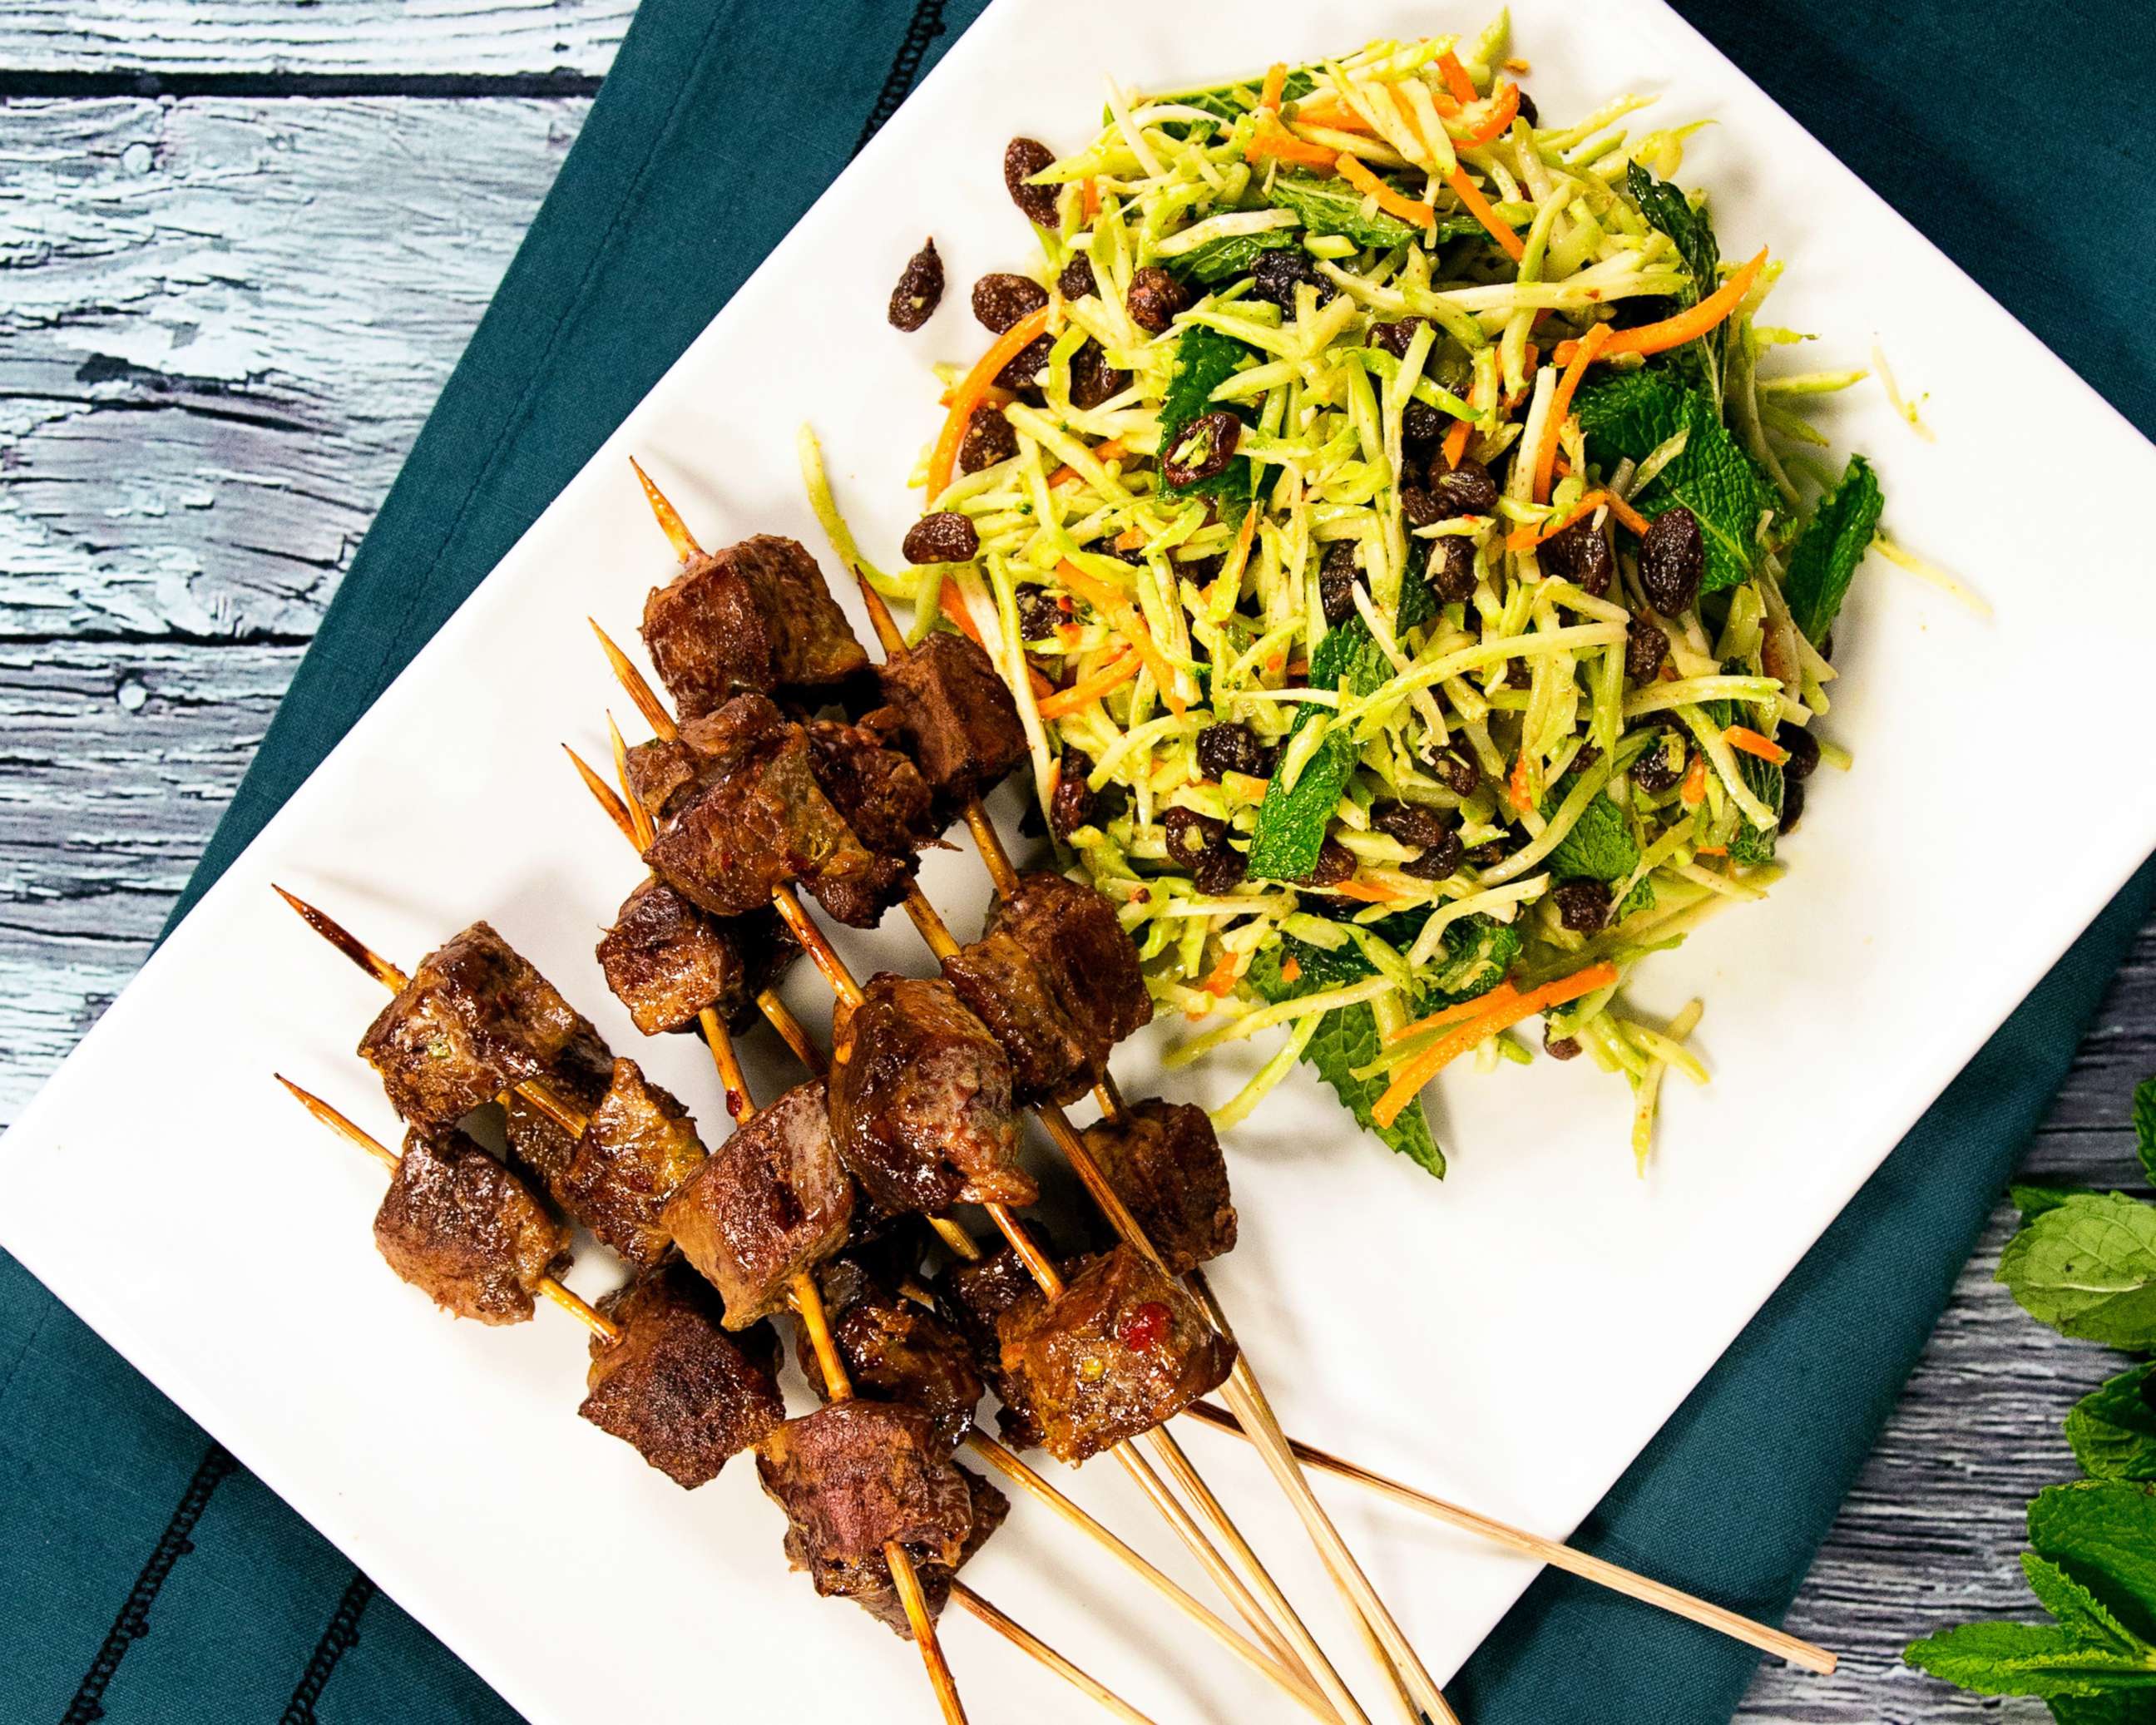 PHOTO: Daphne Oz shares her recipe for coconut beef skewers with broccoli slaw.